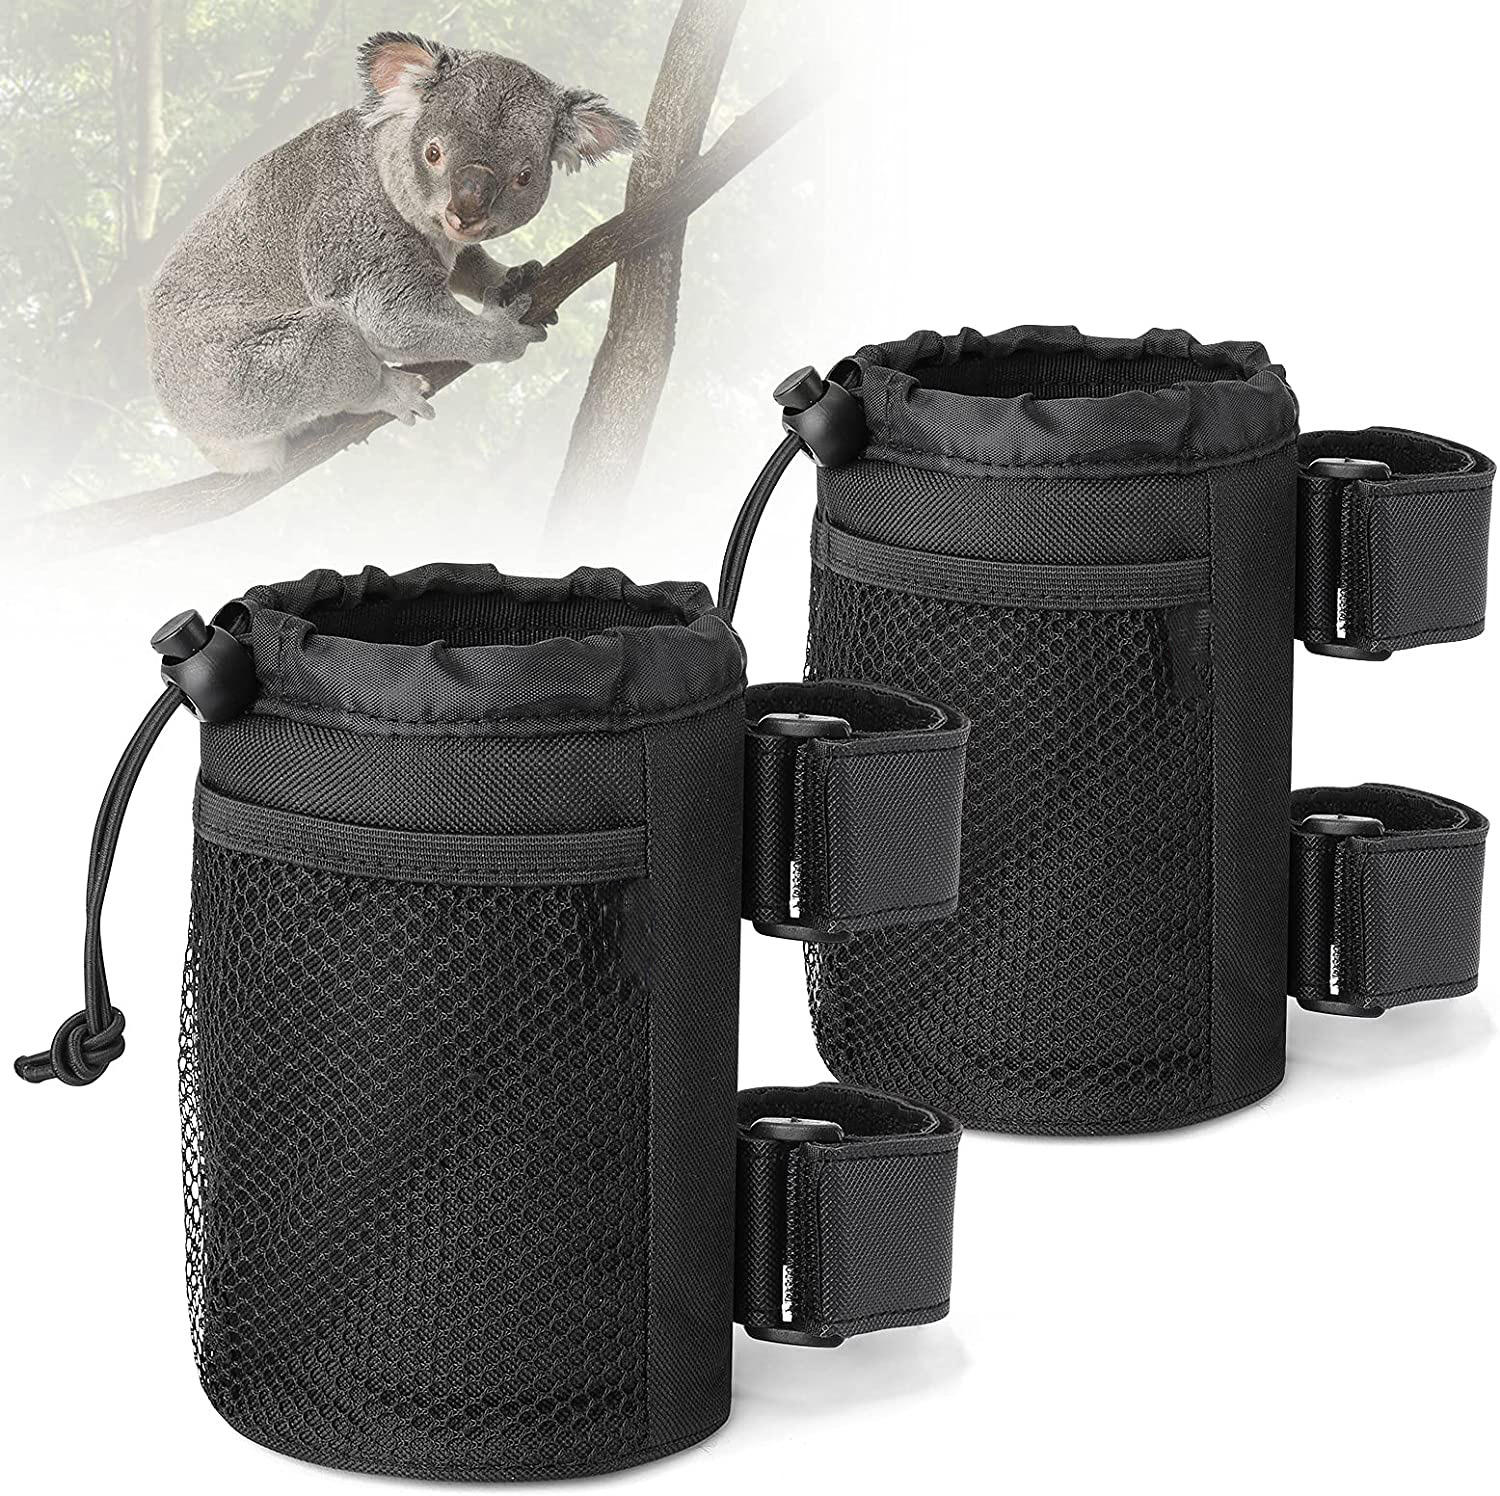 Amazon Hot luggage travel drink bag cup holder Pouch Travel Cup Holder Thermal Insulation Reusable Drink Carrier